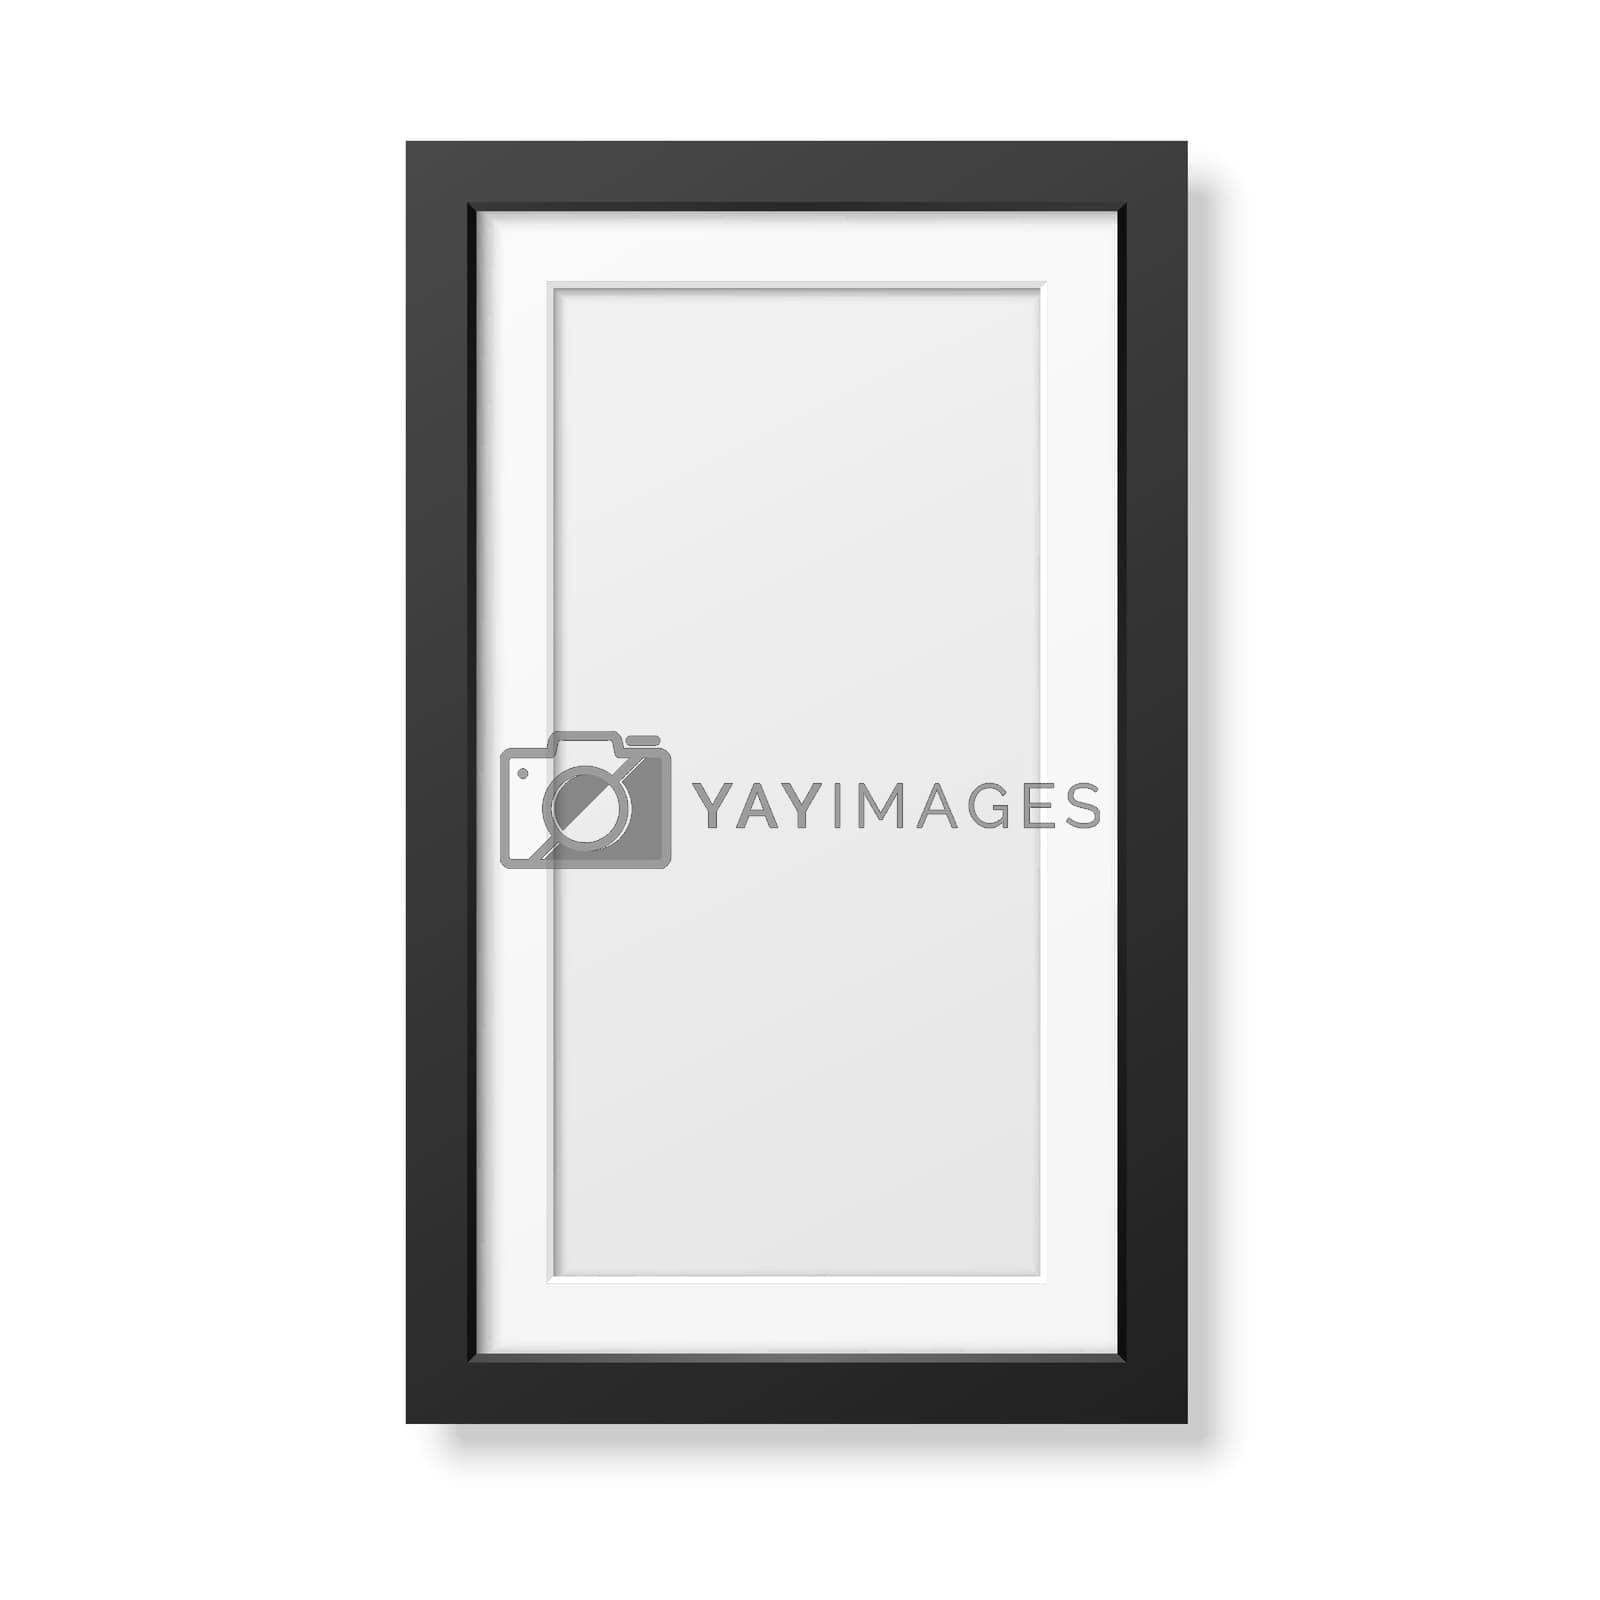 Royalty free image of Realistic black frame by Gomolach